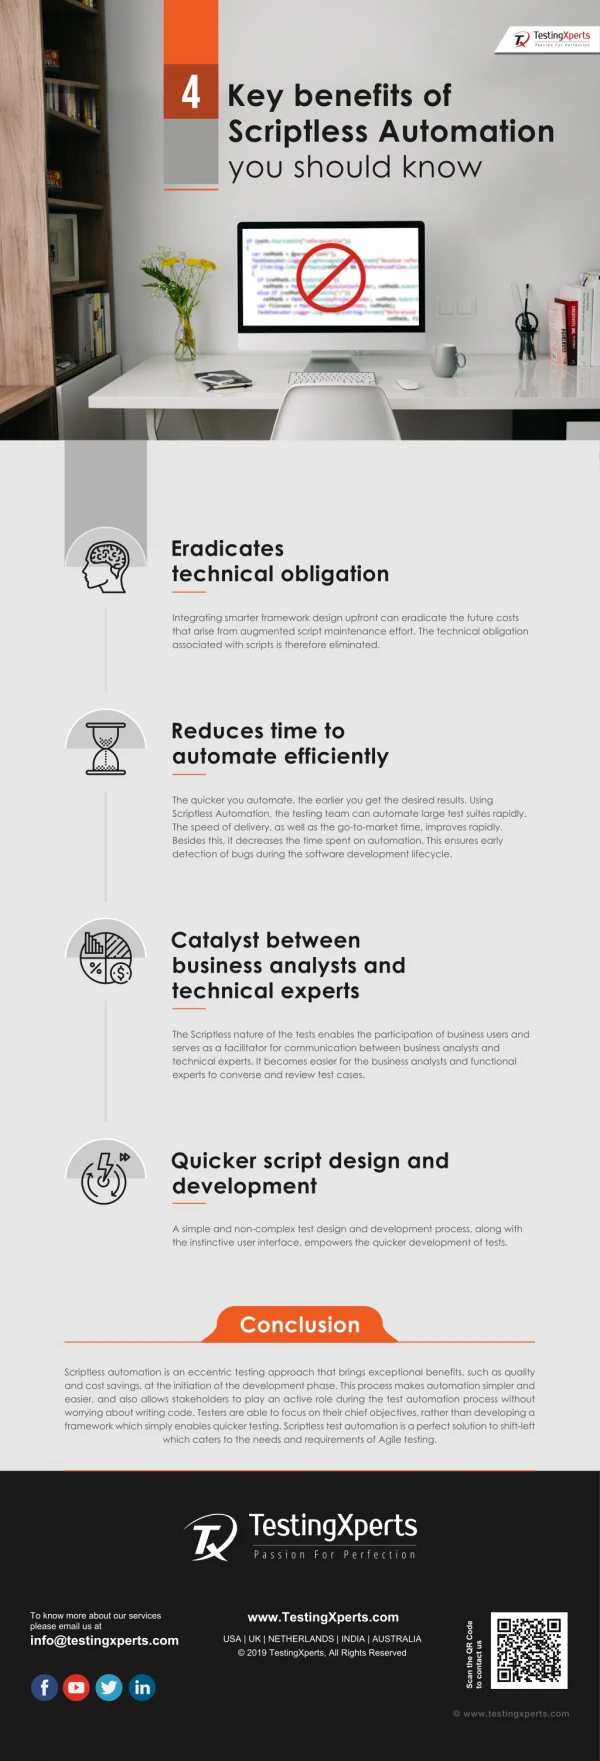 4 Key benefits of Scriptless Automation you should know